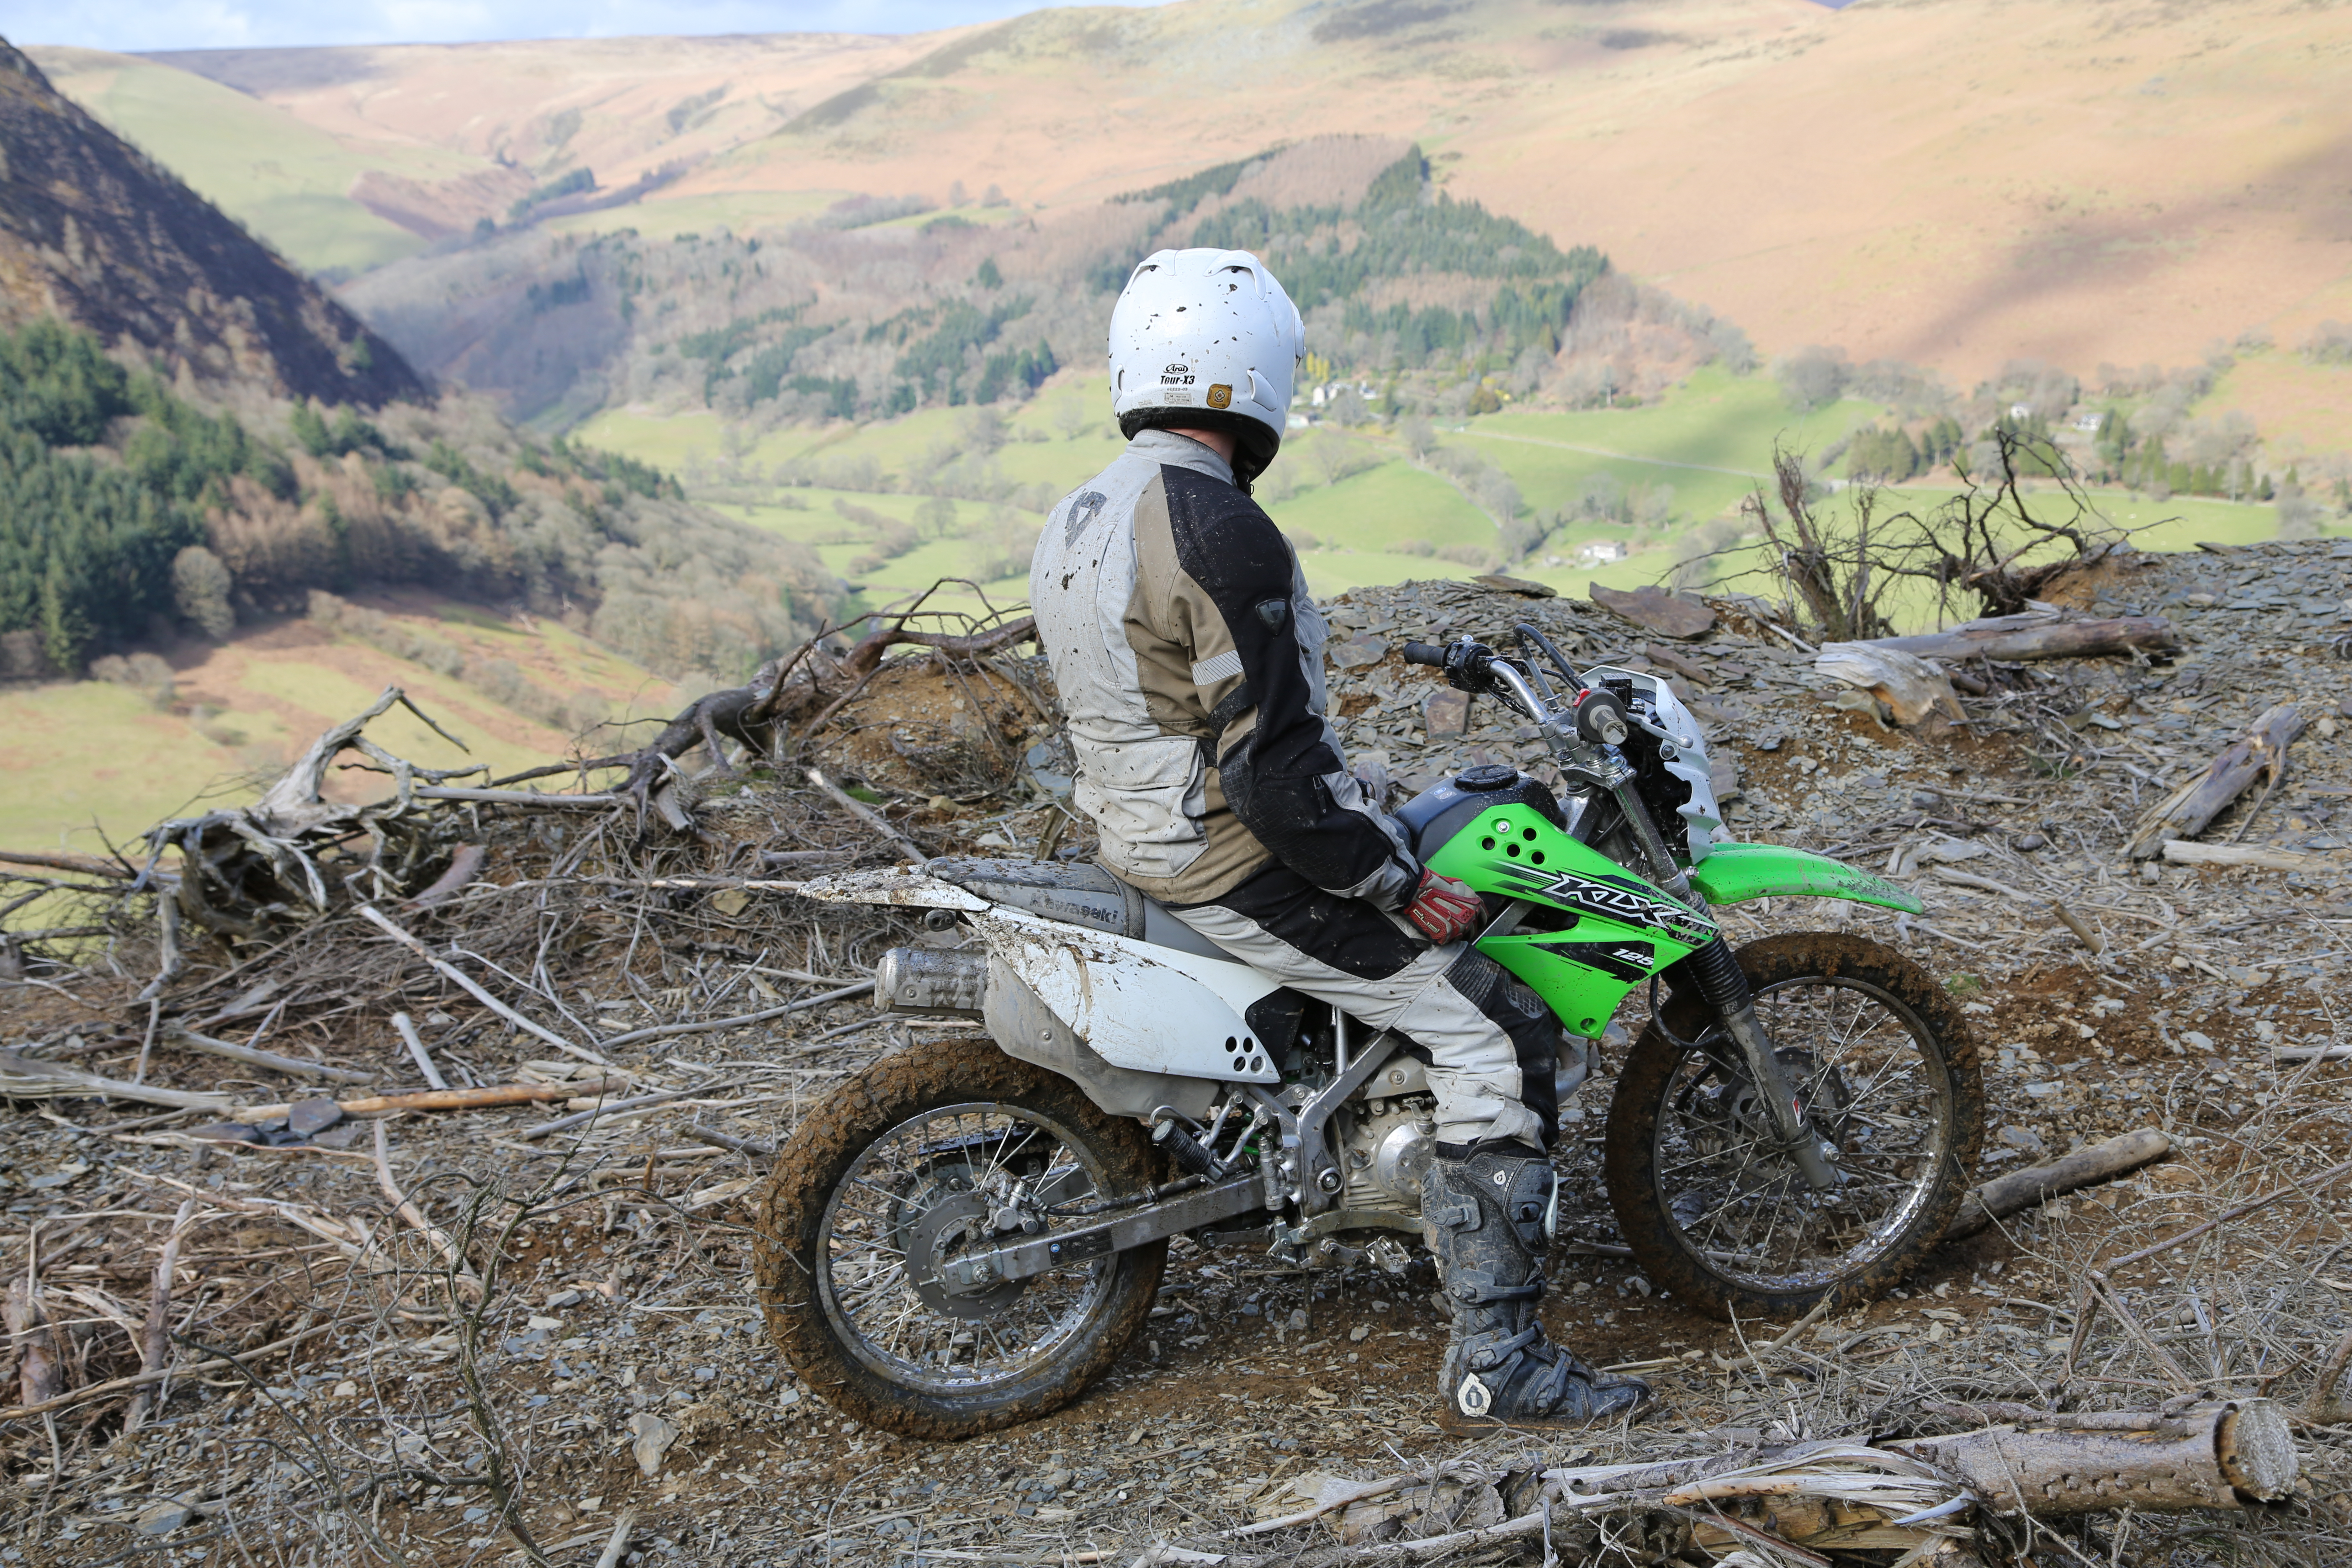 Review: Mick Extance Enduro Experience